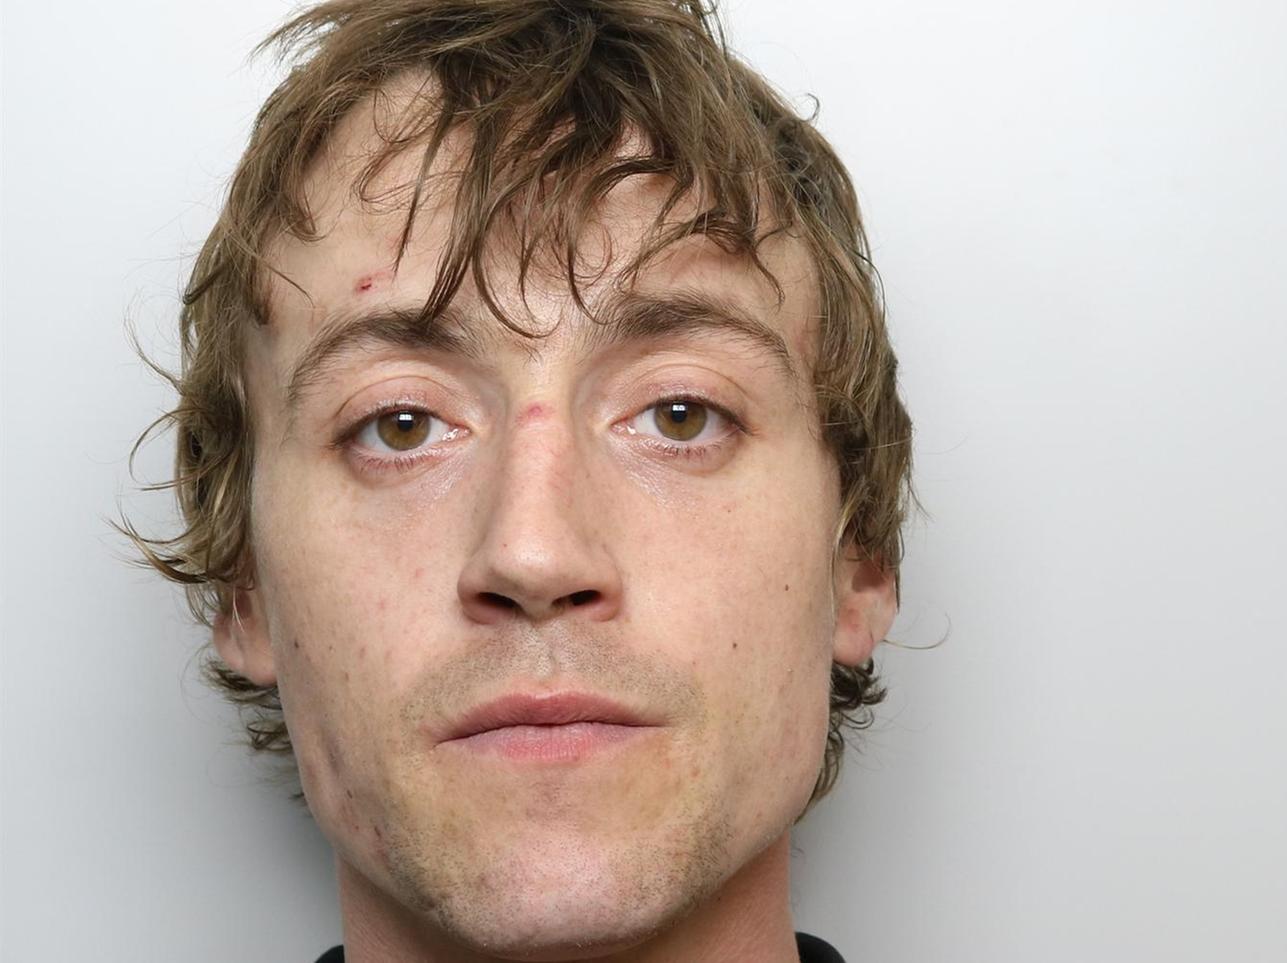 Drug dealer William Wood was caught at Leeds Festival when security staff noticed his wristband had expired.